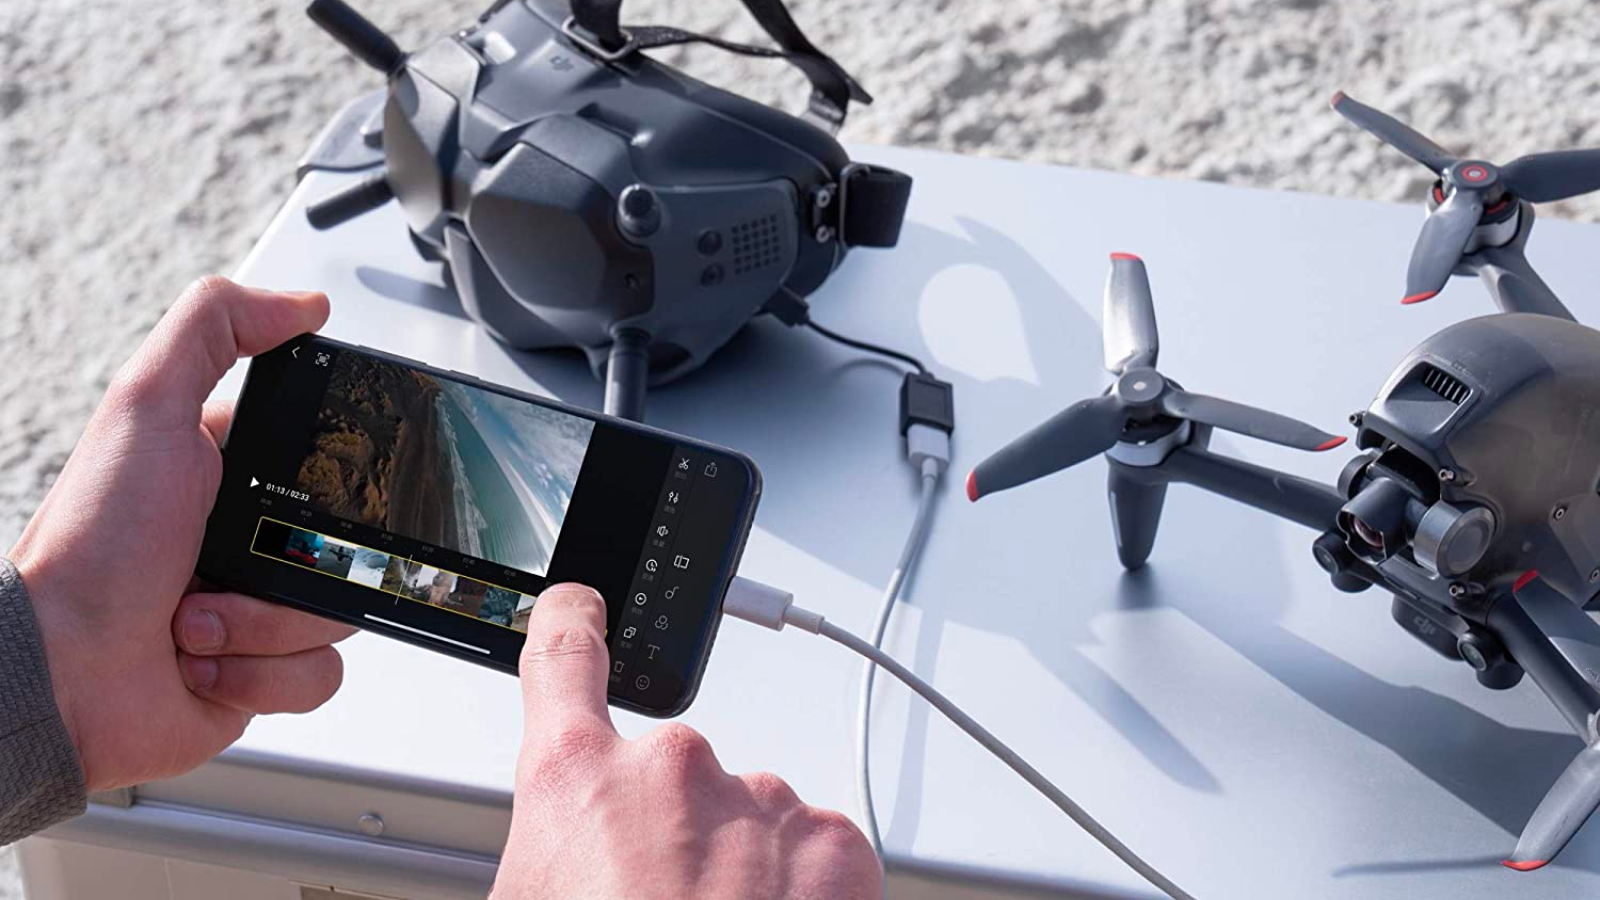 a close-up of a person looking at drone footage on a smartphone in front of a dji drone and its goggles sitting on a metal case